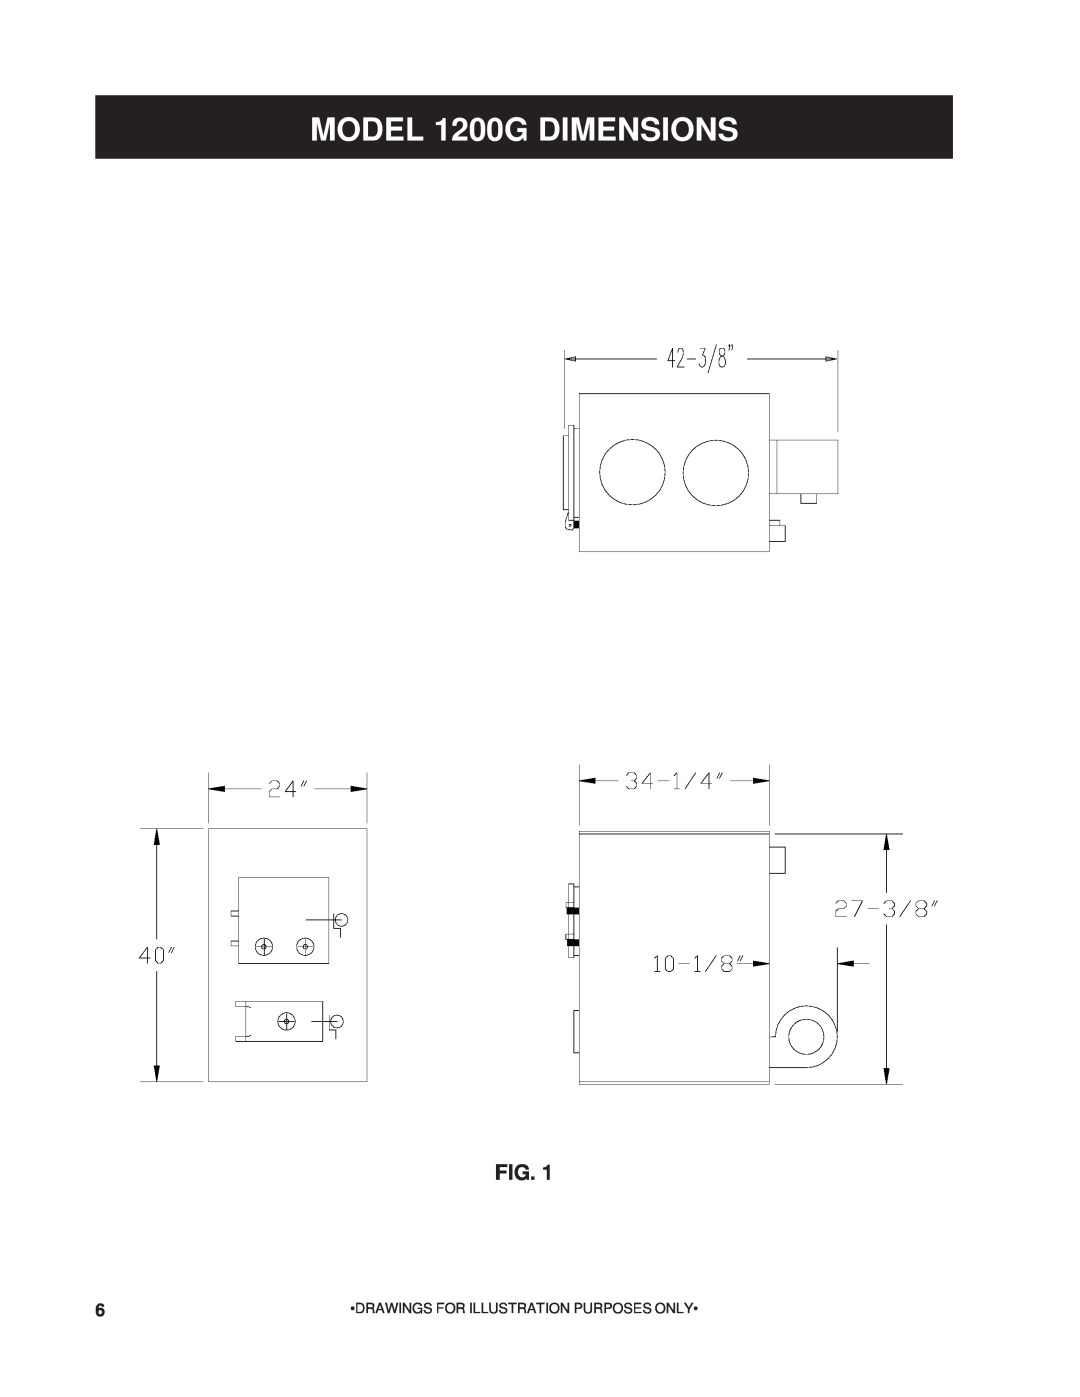 United States Stove owner manual MODEL 1200G DIMENSIONS, Drawings For Illustration Purposes Only 